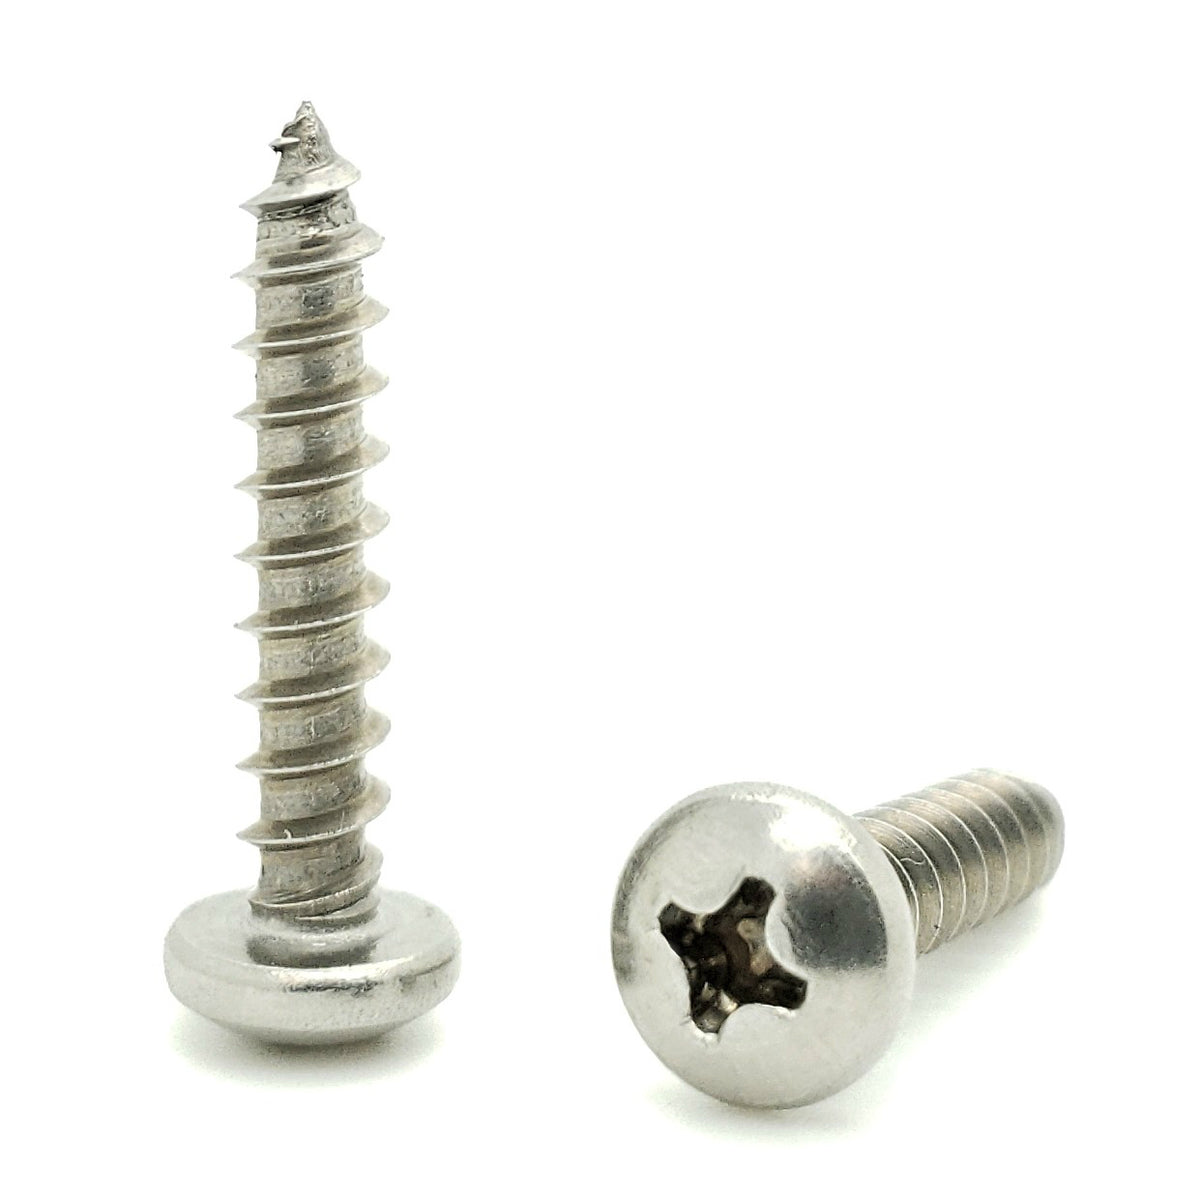 50 Qty #10 x 3/4" Oval Head 304 Stainless Phillips Head Wood Screws BCP632 